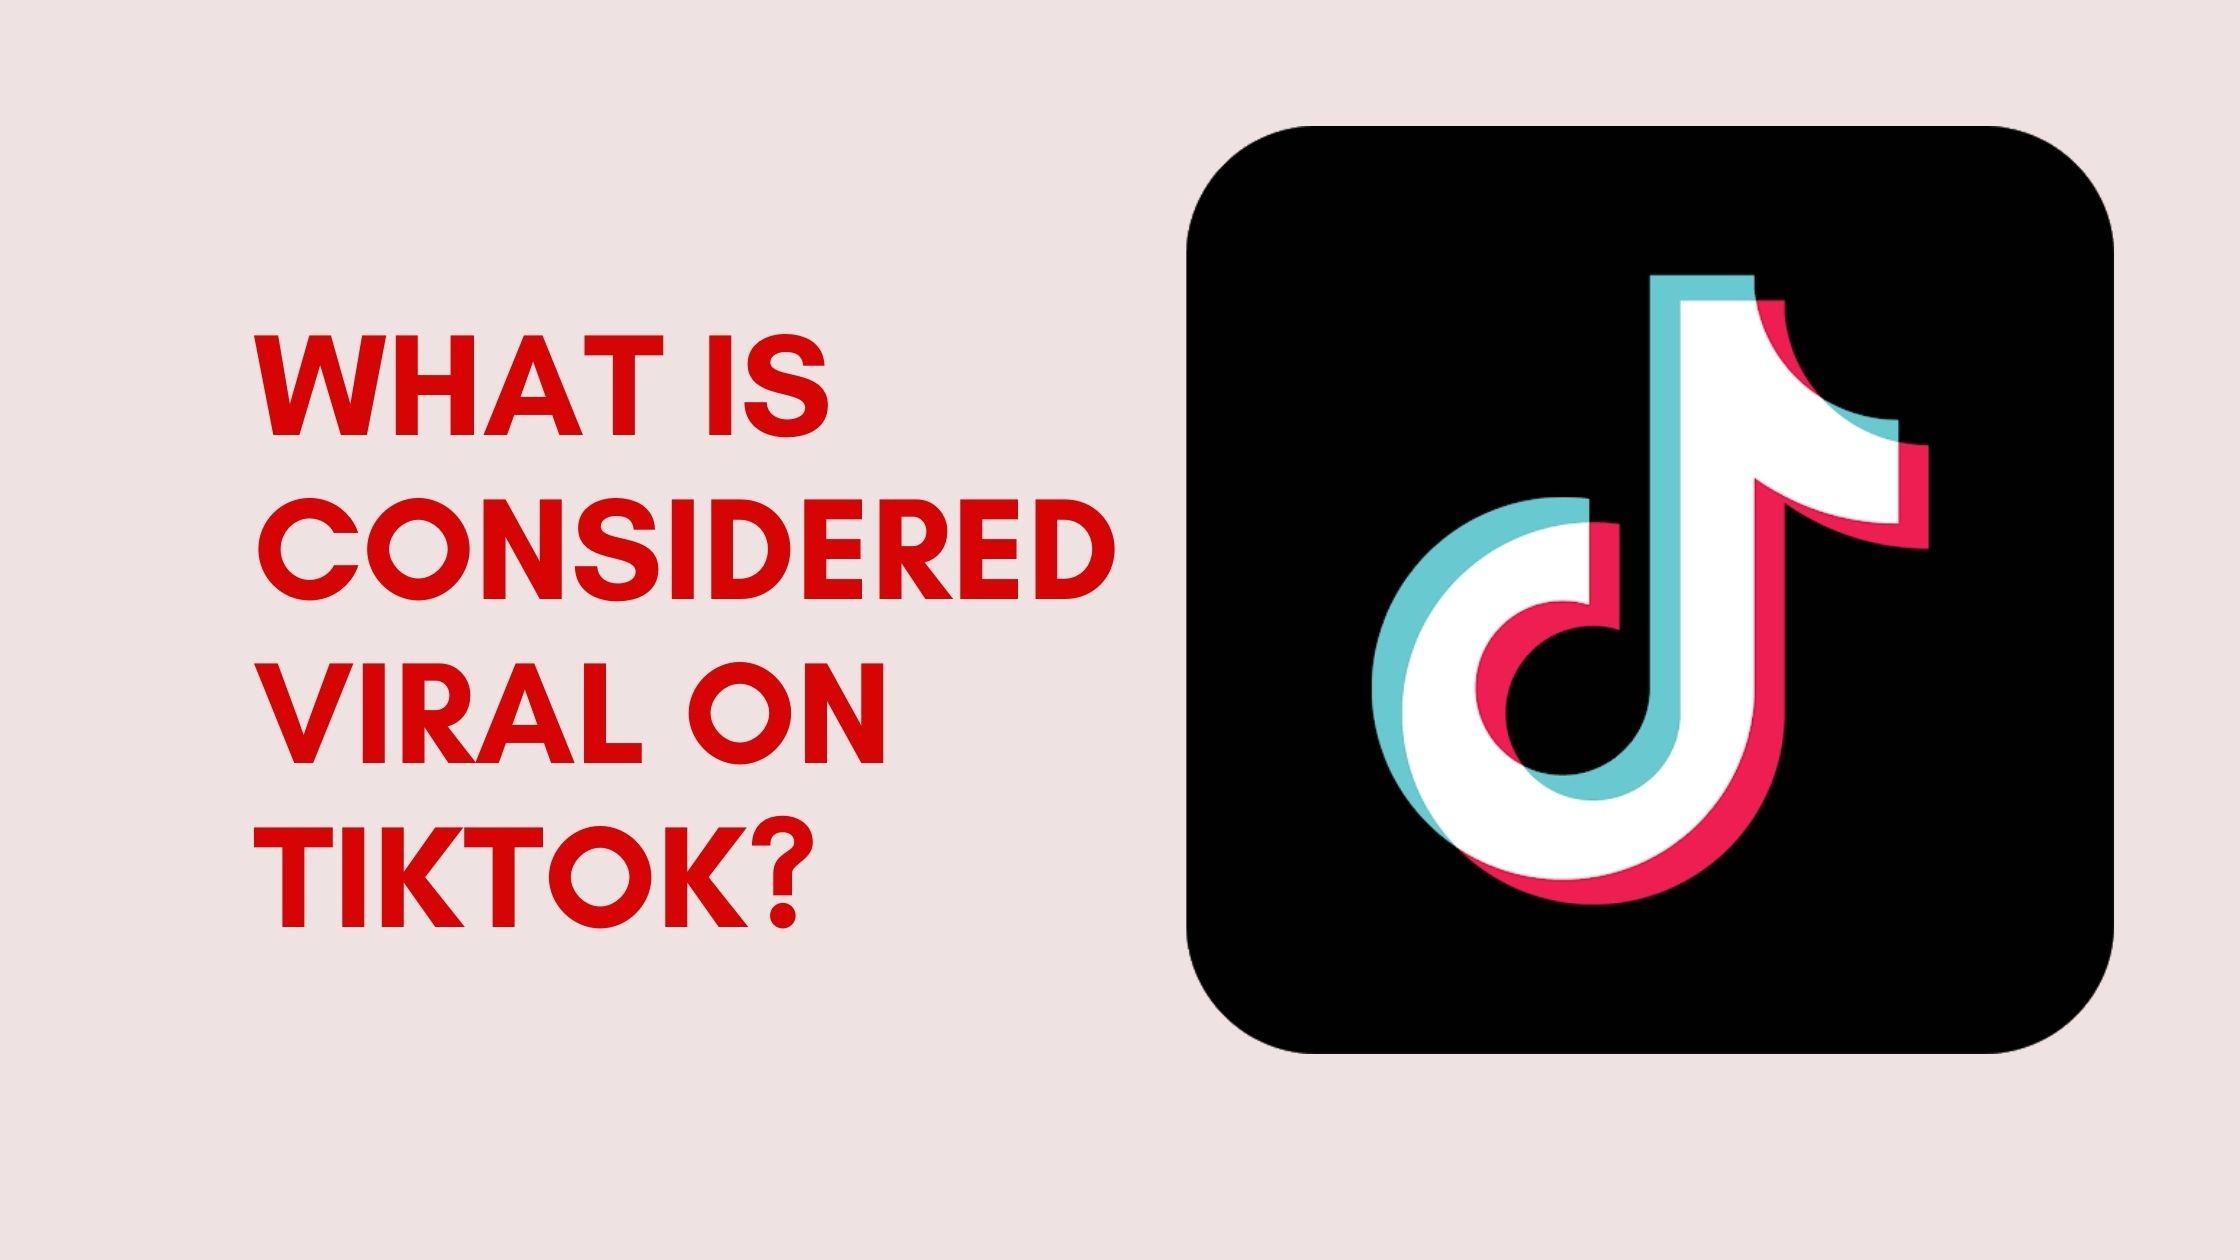 What is considered viral on TikTok